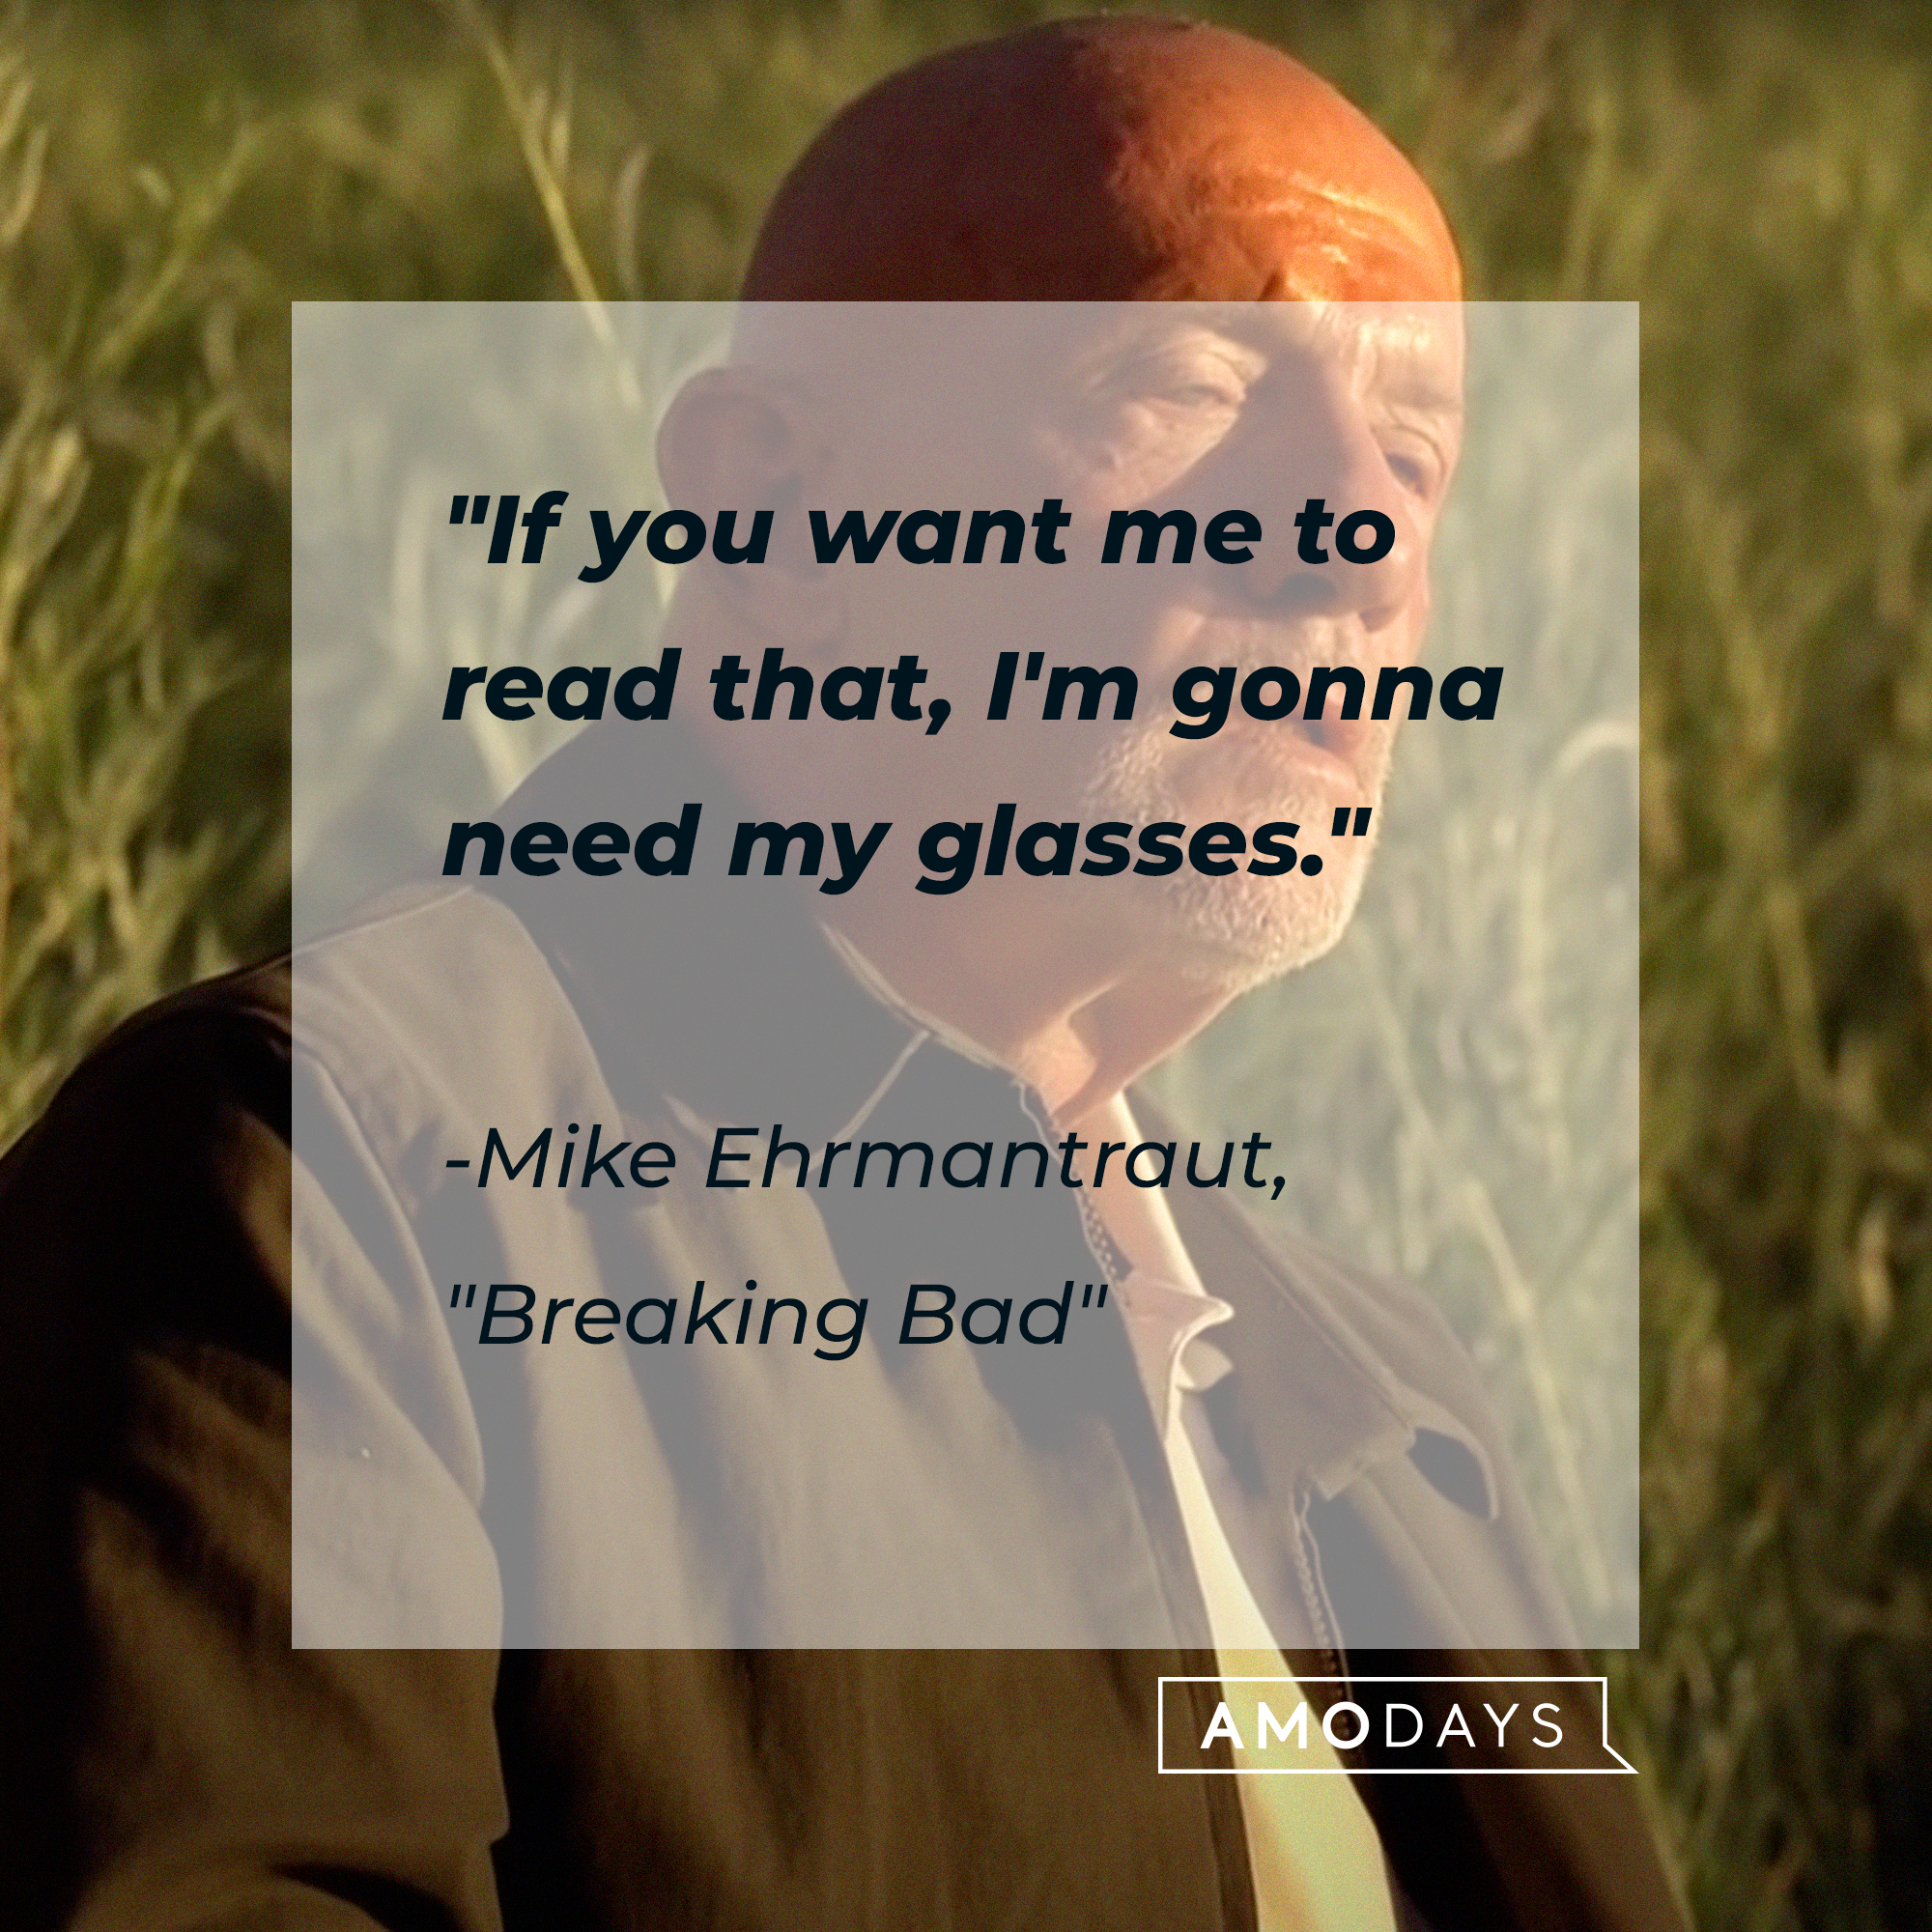 Mike Ehrmantraut with his quote, "If you want me to read that, I'm gonna need my glasses." | Source: youtube.com/breakingbad